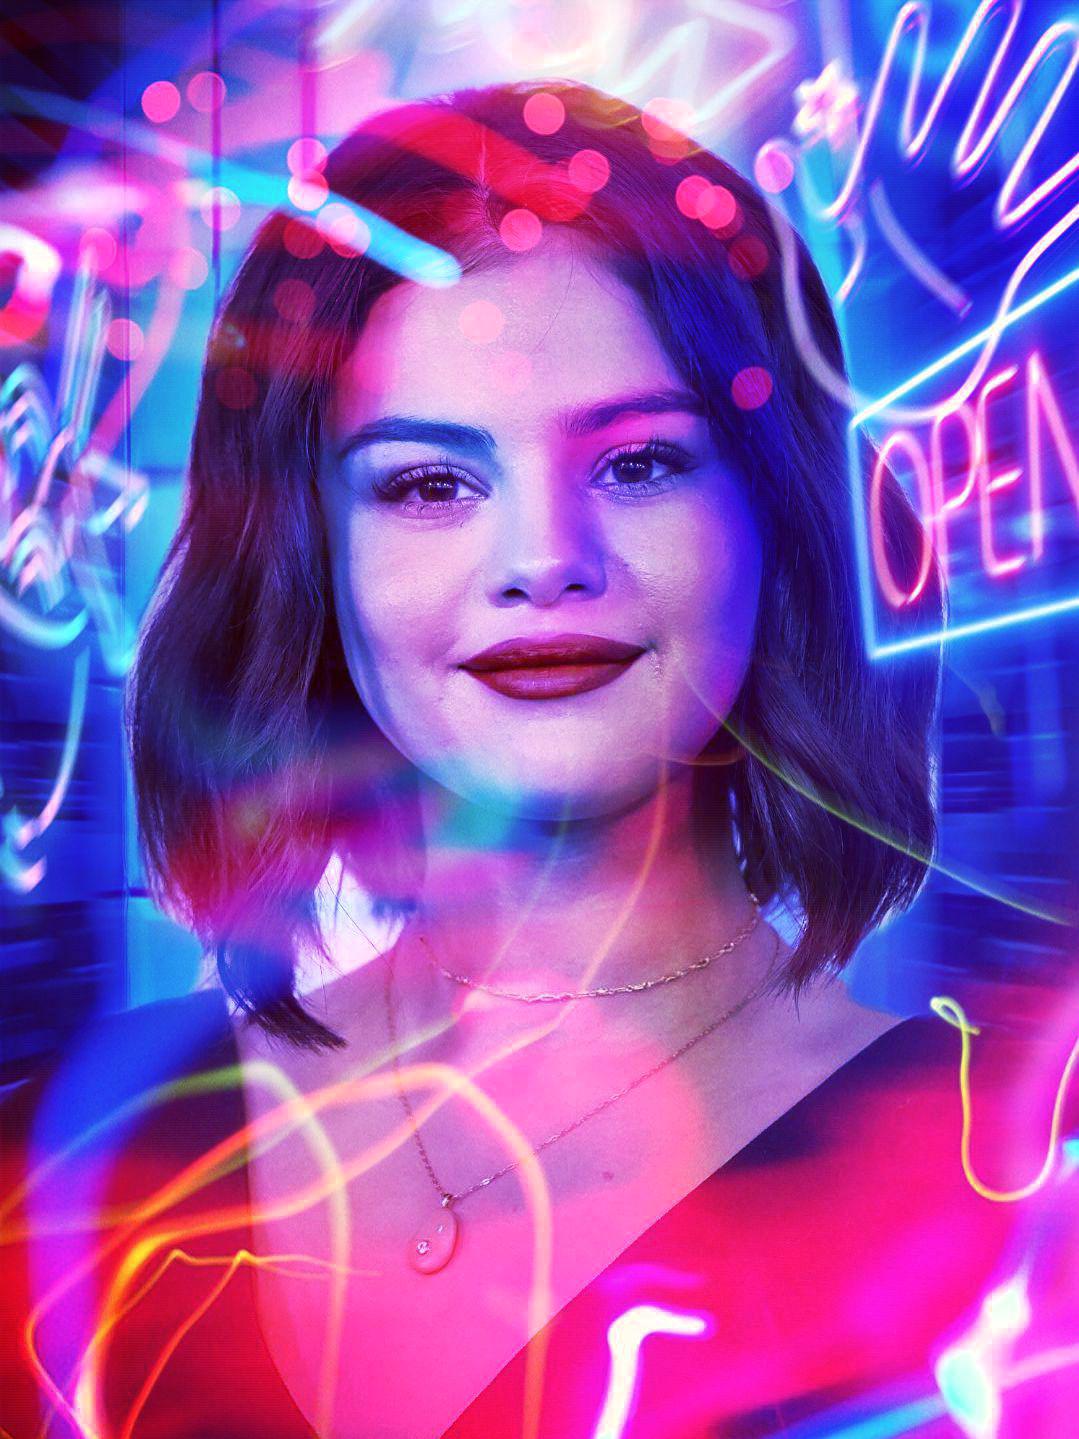 Crime Patrol Xxx Aeqis - Selena Gomez - December Giveaway! - Celeb ART - Beautiful Artworks of  Celebrities, Footballers, Politicians and Famous People in World | OpenSea